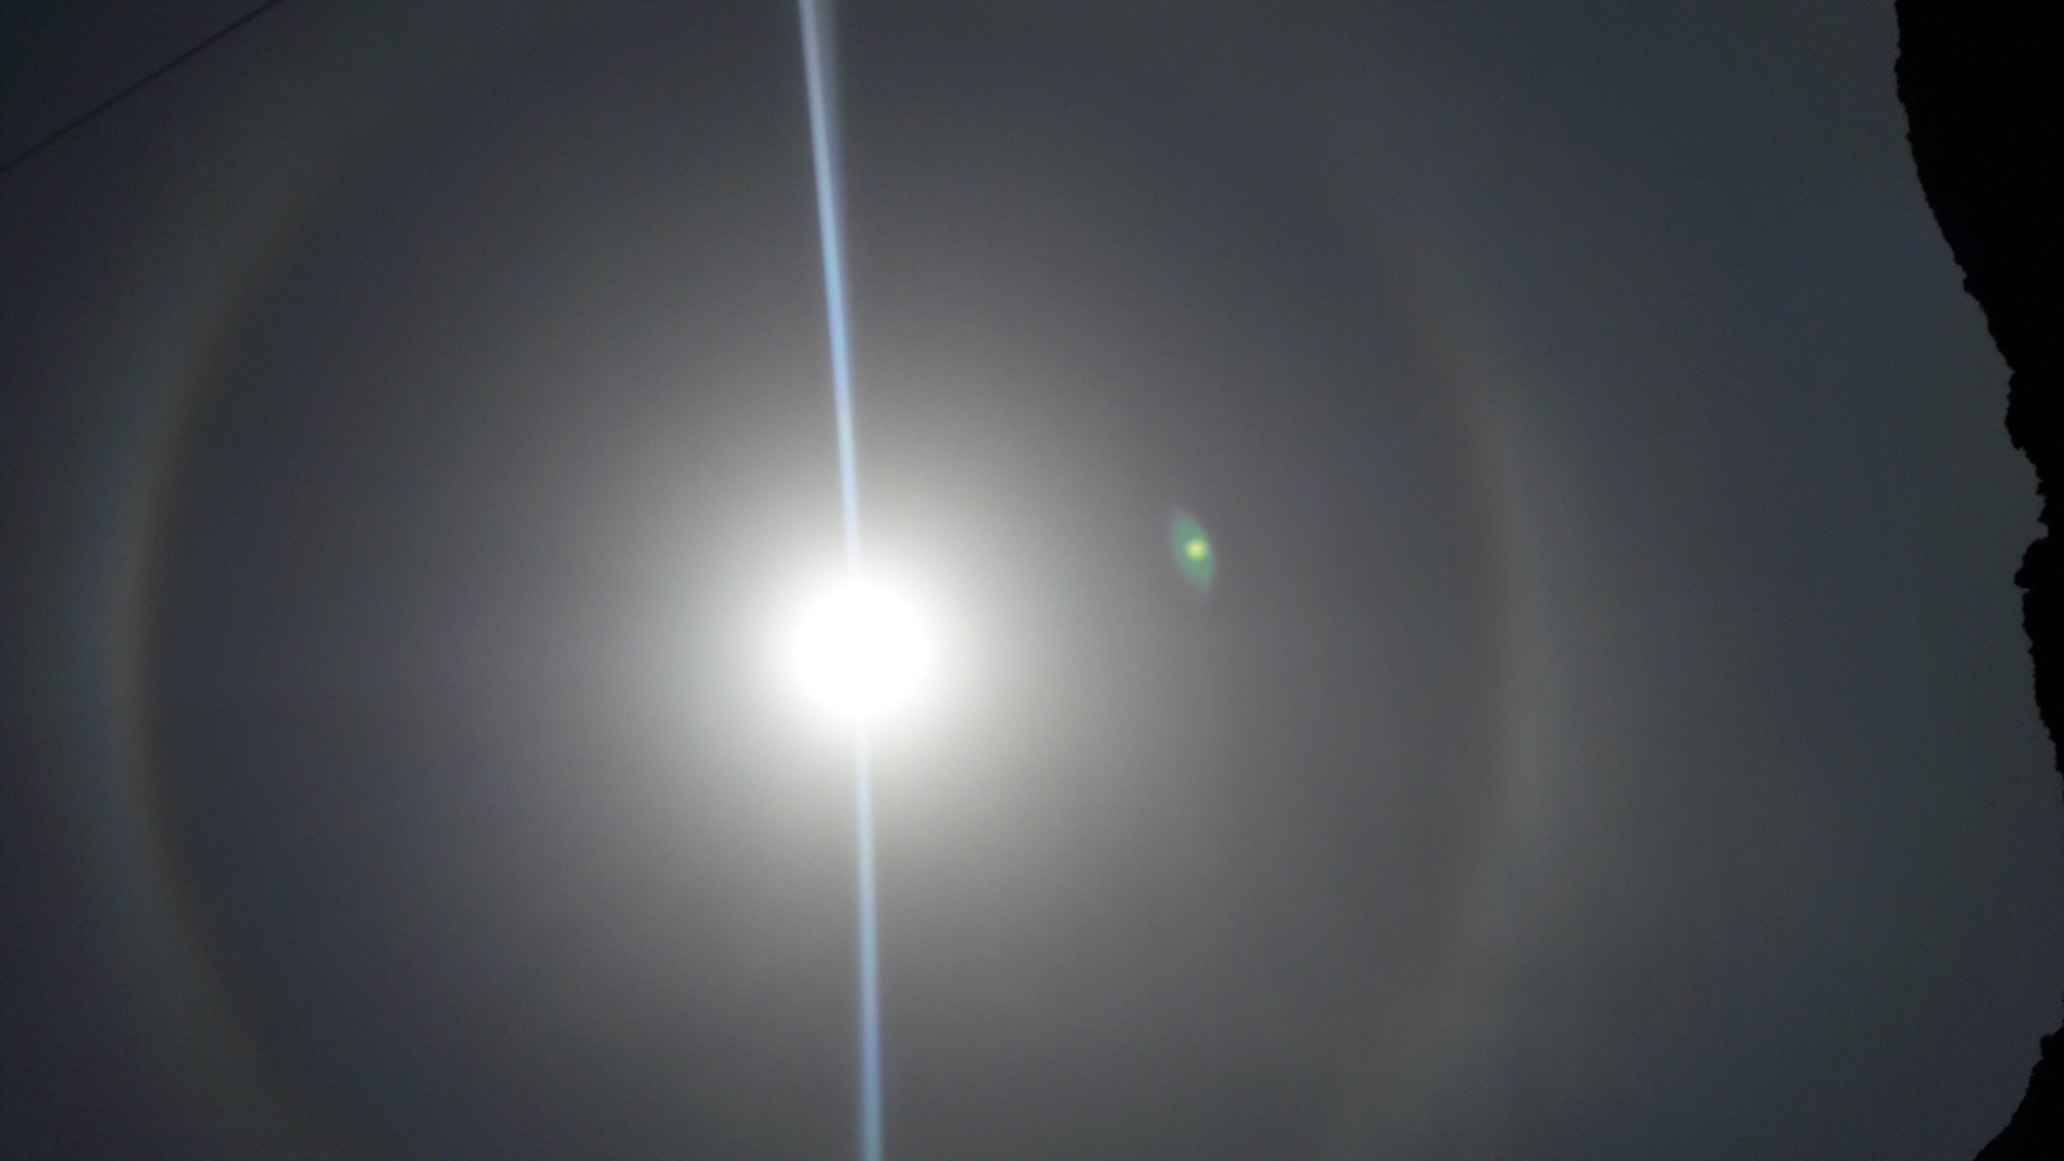 Another Halo predicting the bad weather to come